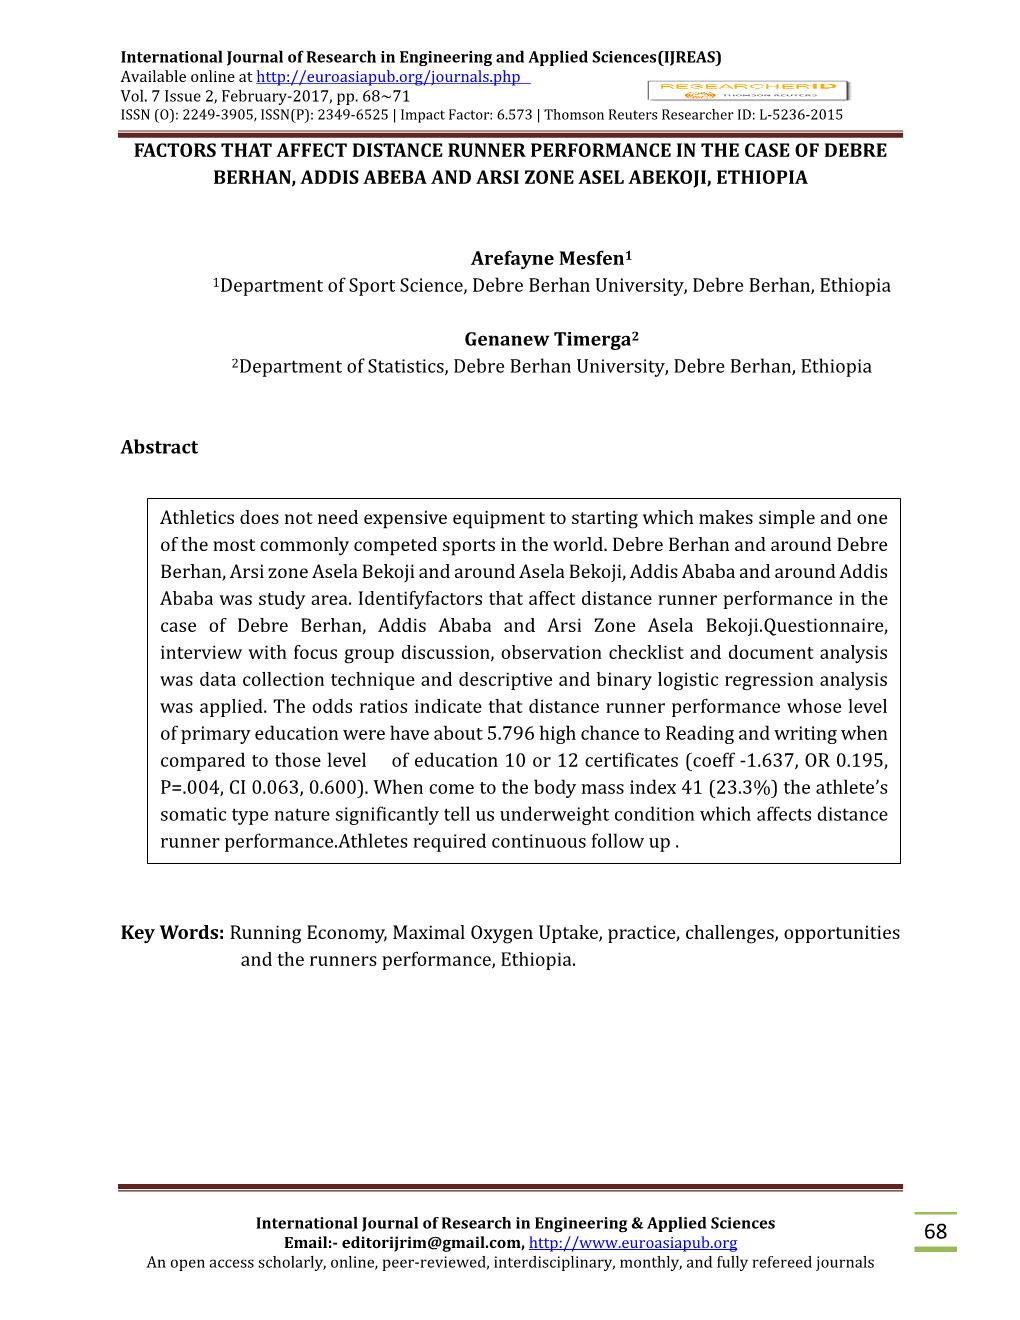 Factors That Affect Distance Runner Performance in the Case of Debre Berhan, Addis Abeba and Arsi Zone Asel Abekoji, Ethiopia